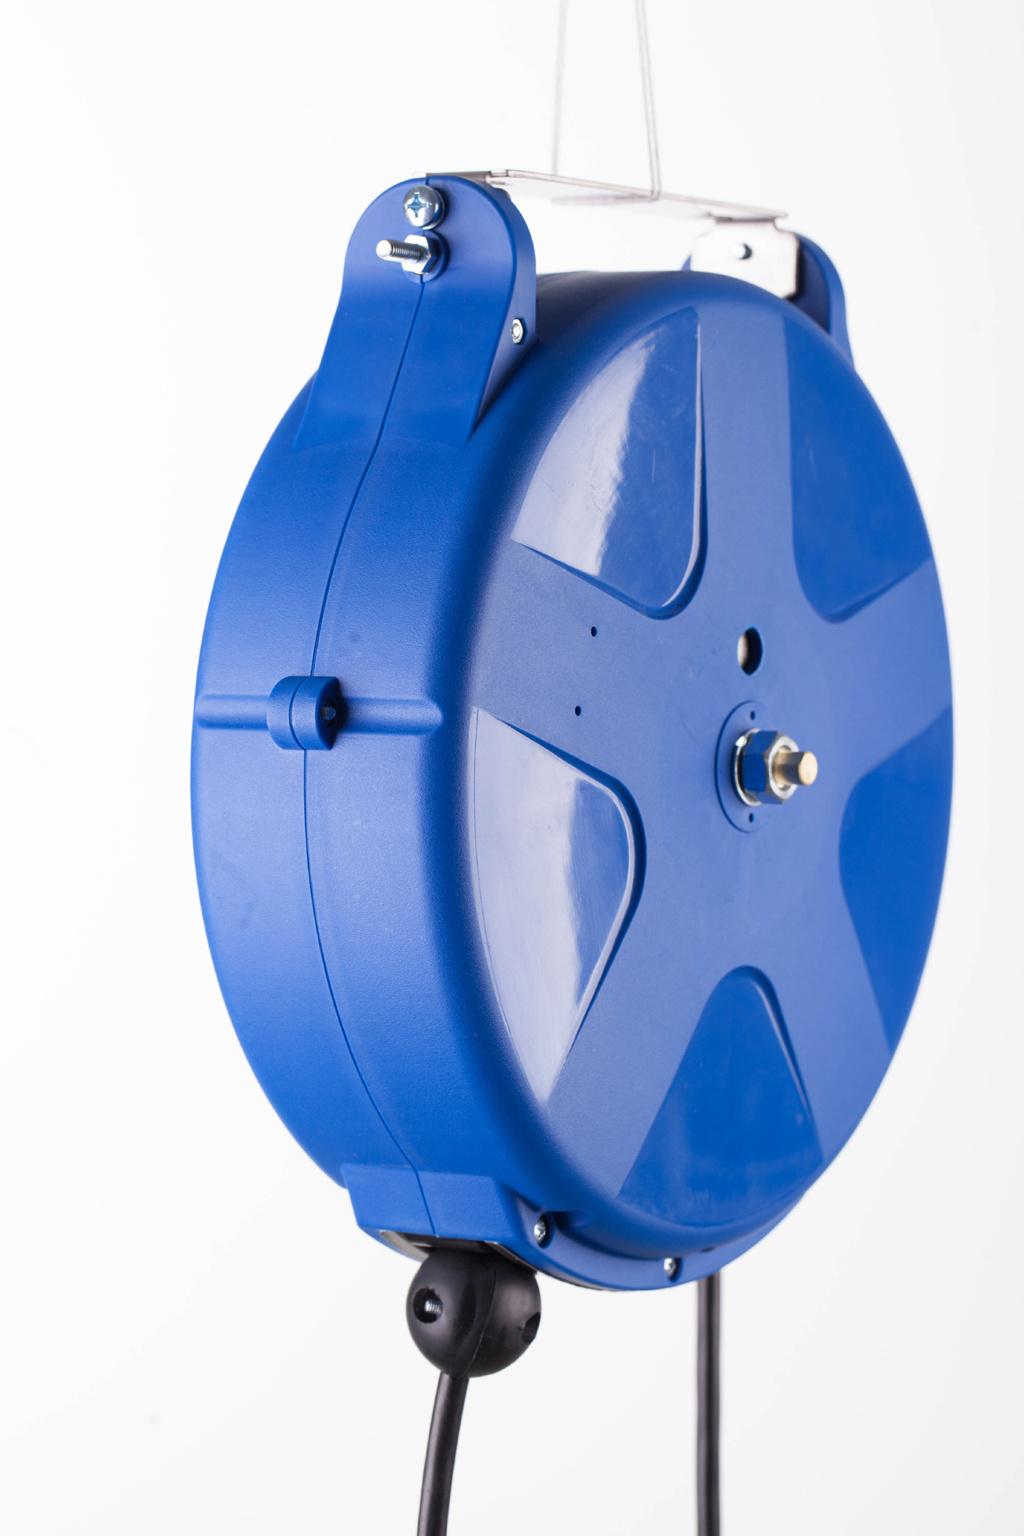 2021 Europ Style of Hose Reel Combination